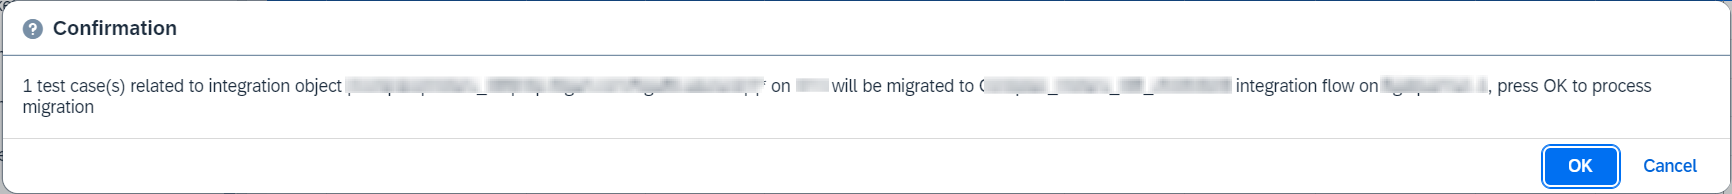 migrate test cases confirmation